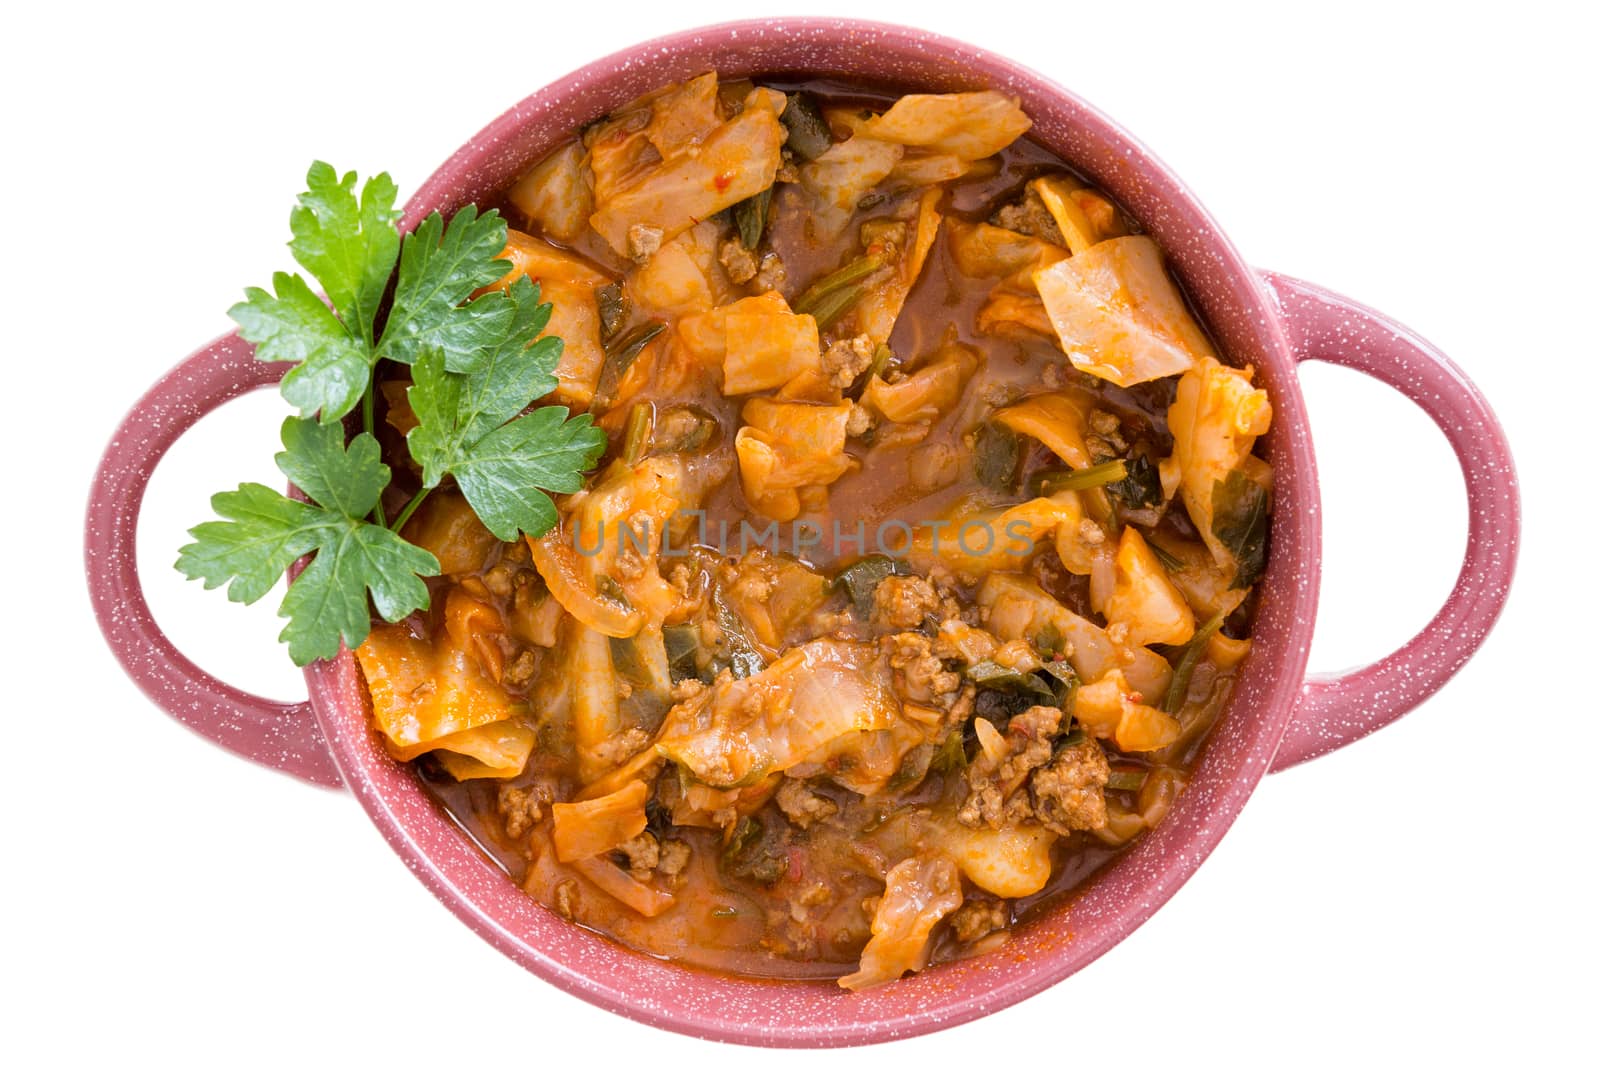 Nutritional cabbage soup with ground beef by coskun